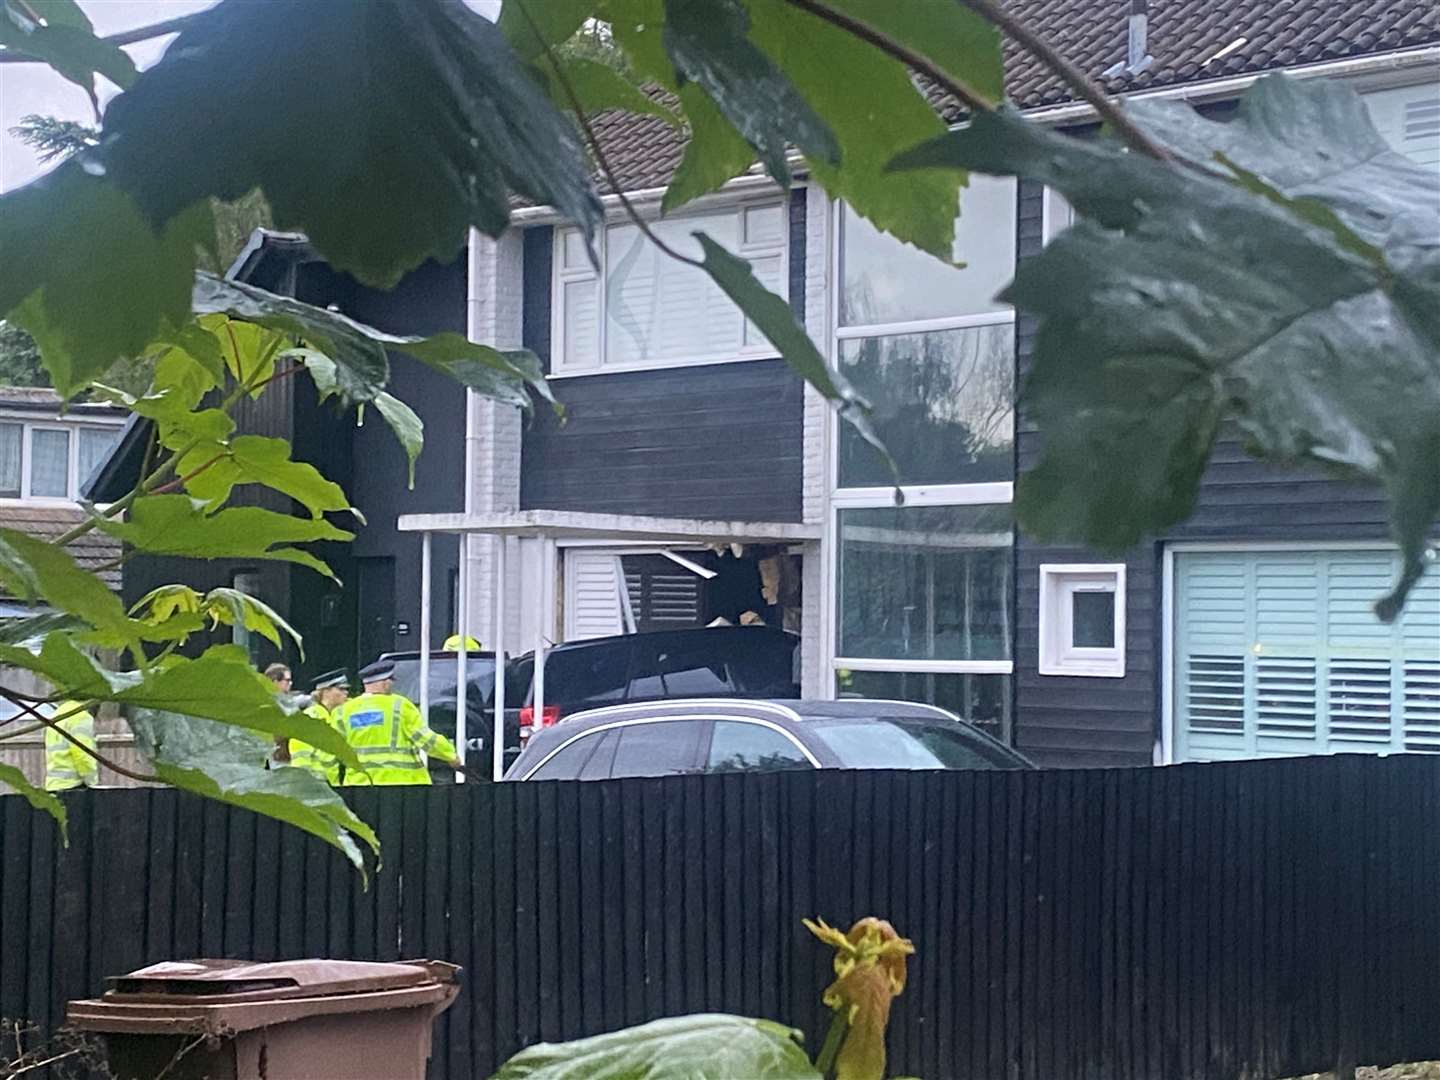 The vehicle has been pictured driven into property in Wigmore Drive, Gillingham